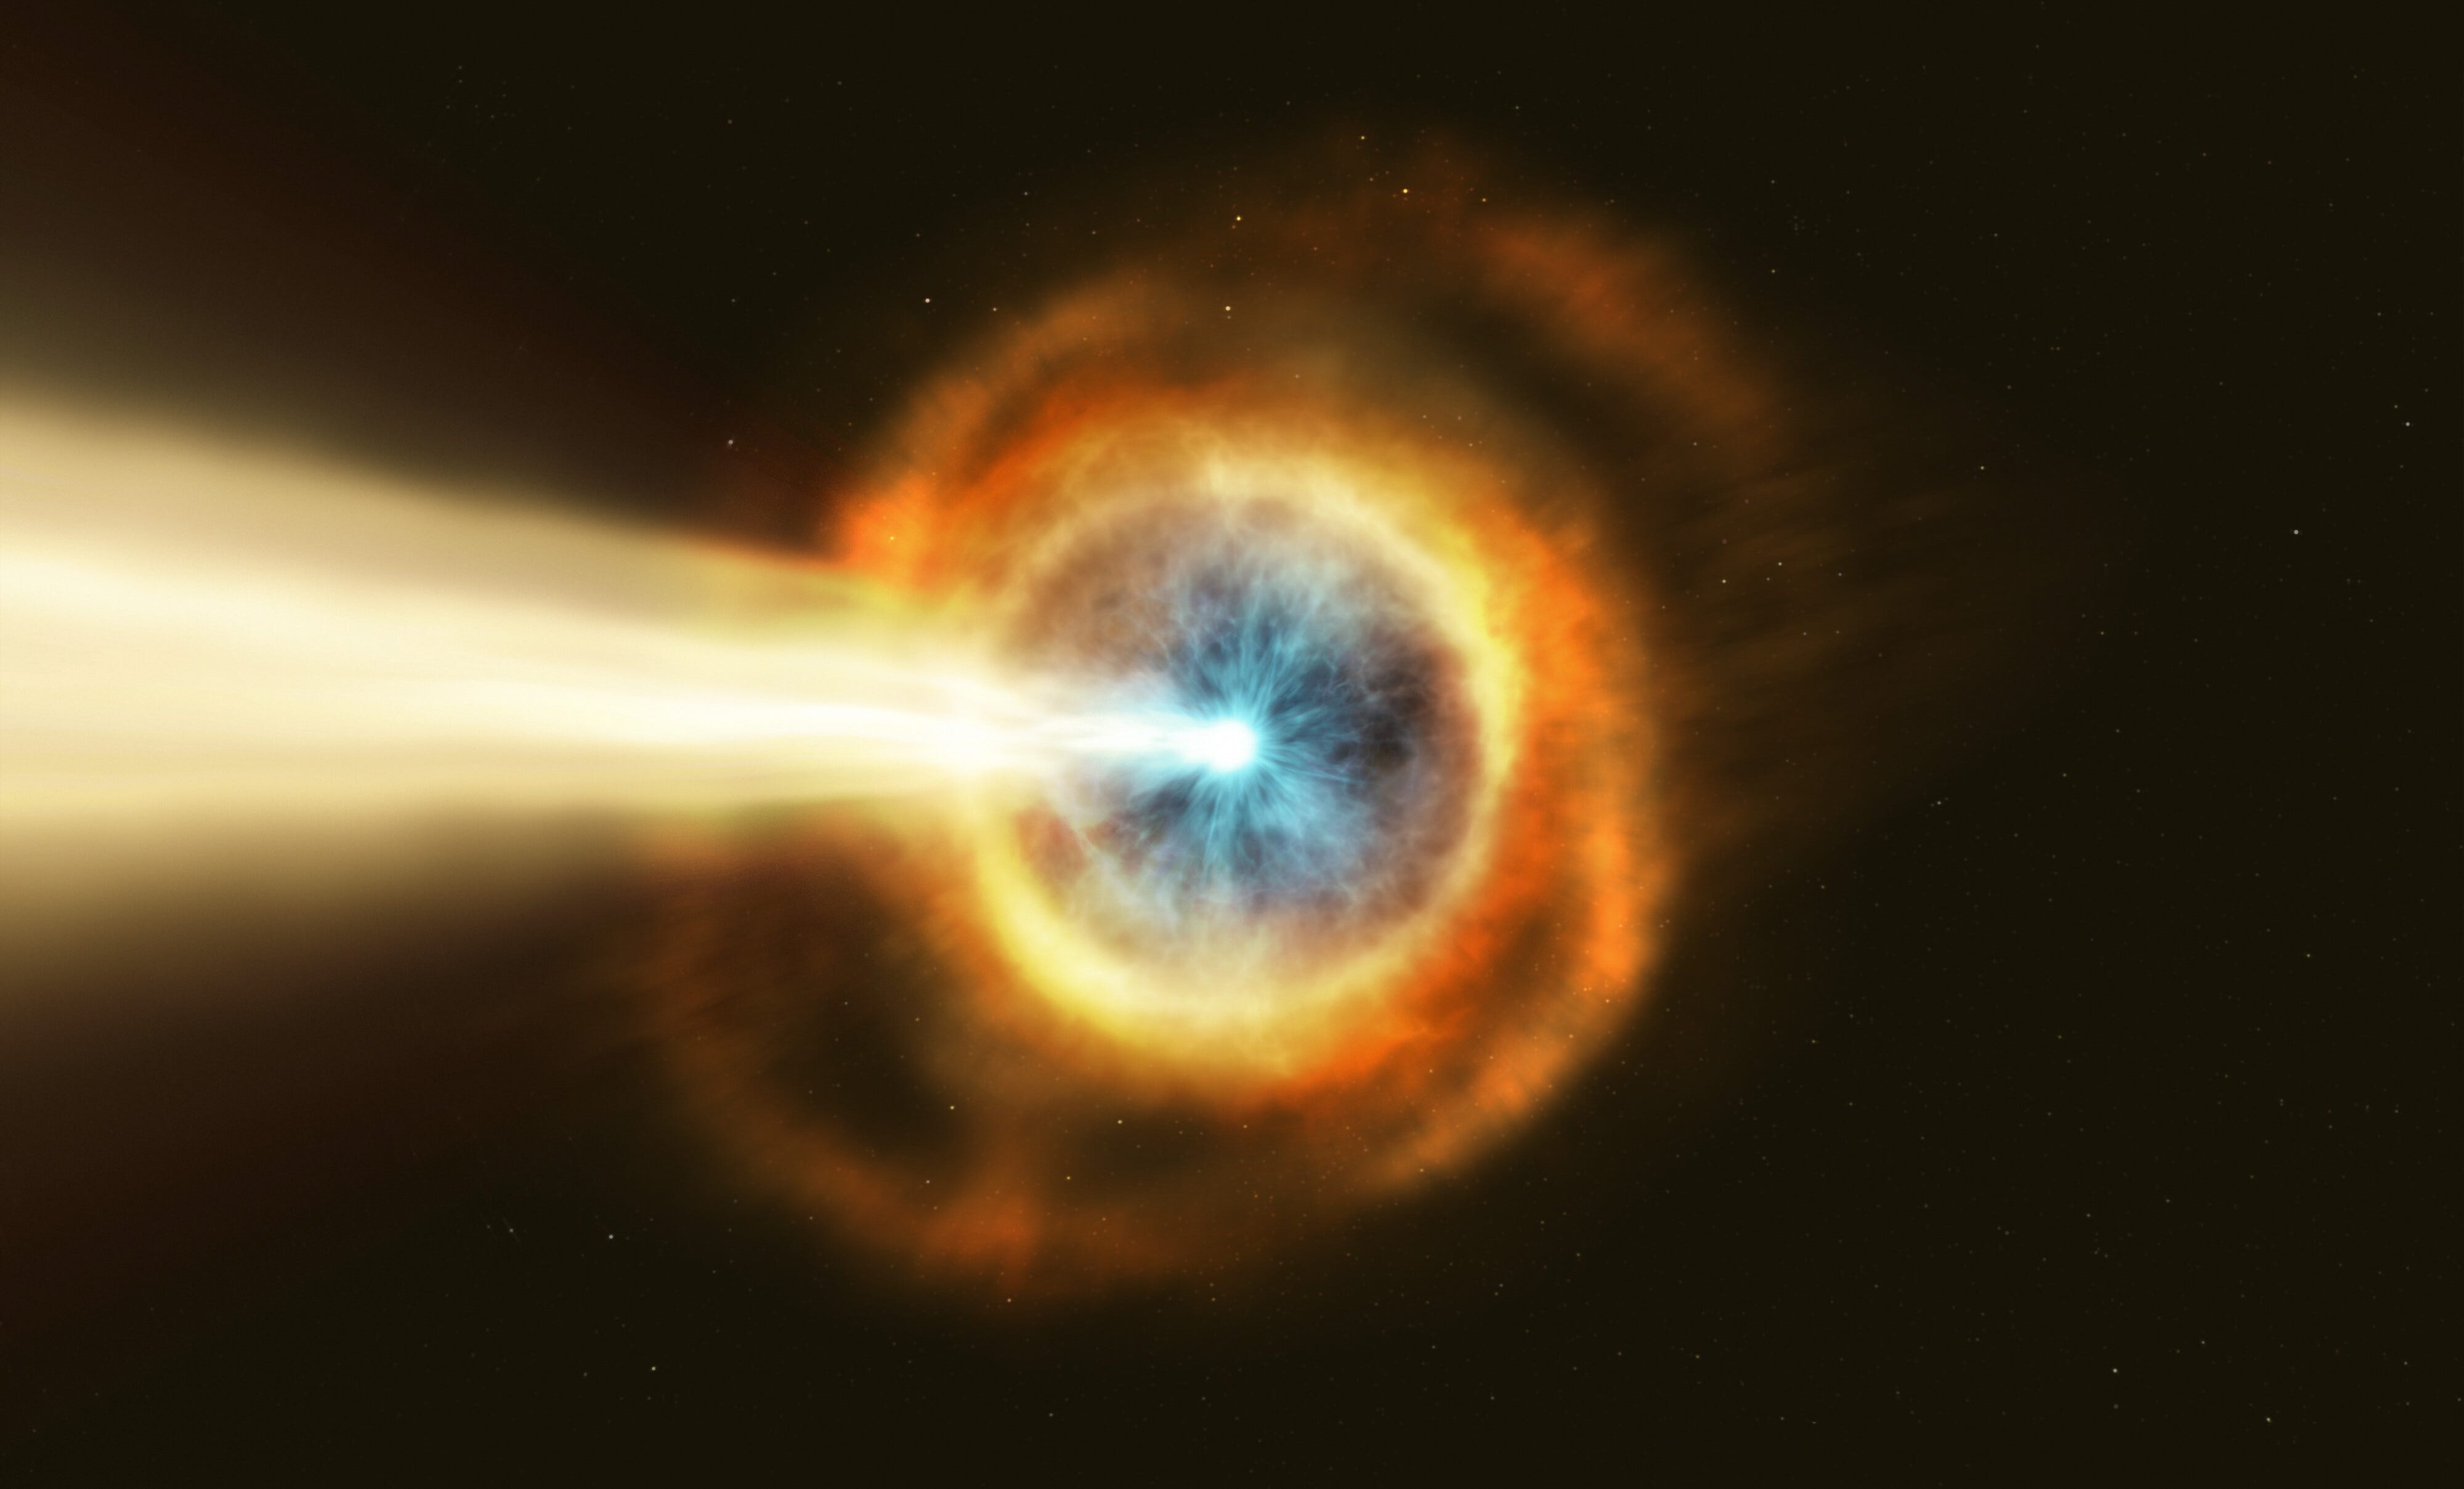 Gammaray burst produces the most energetic light ever recorded